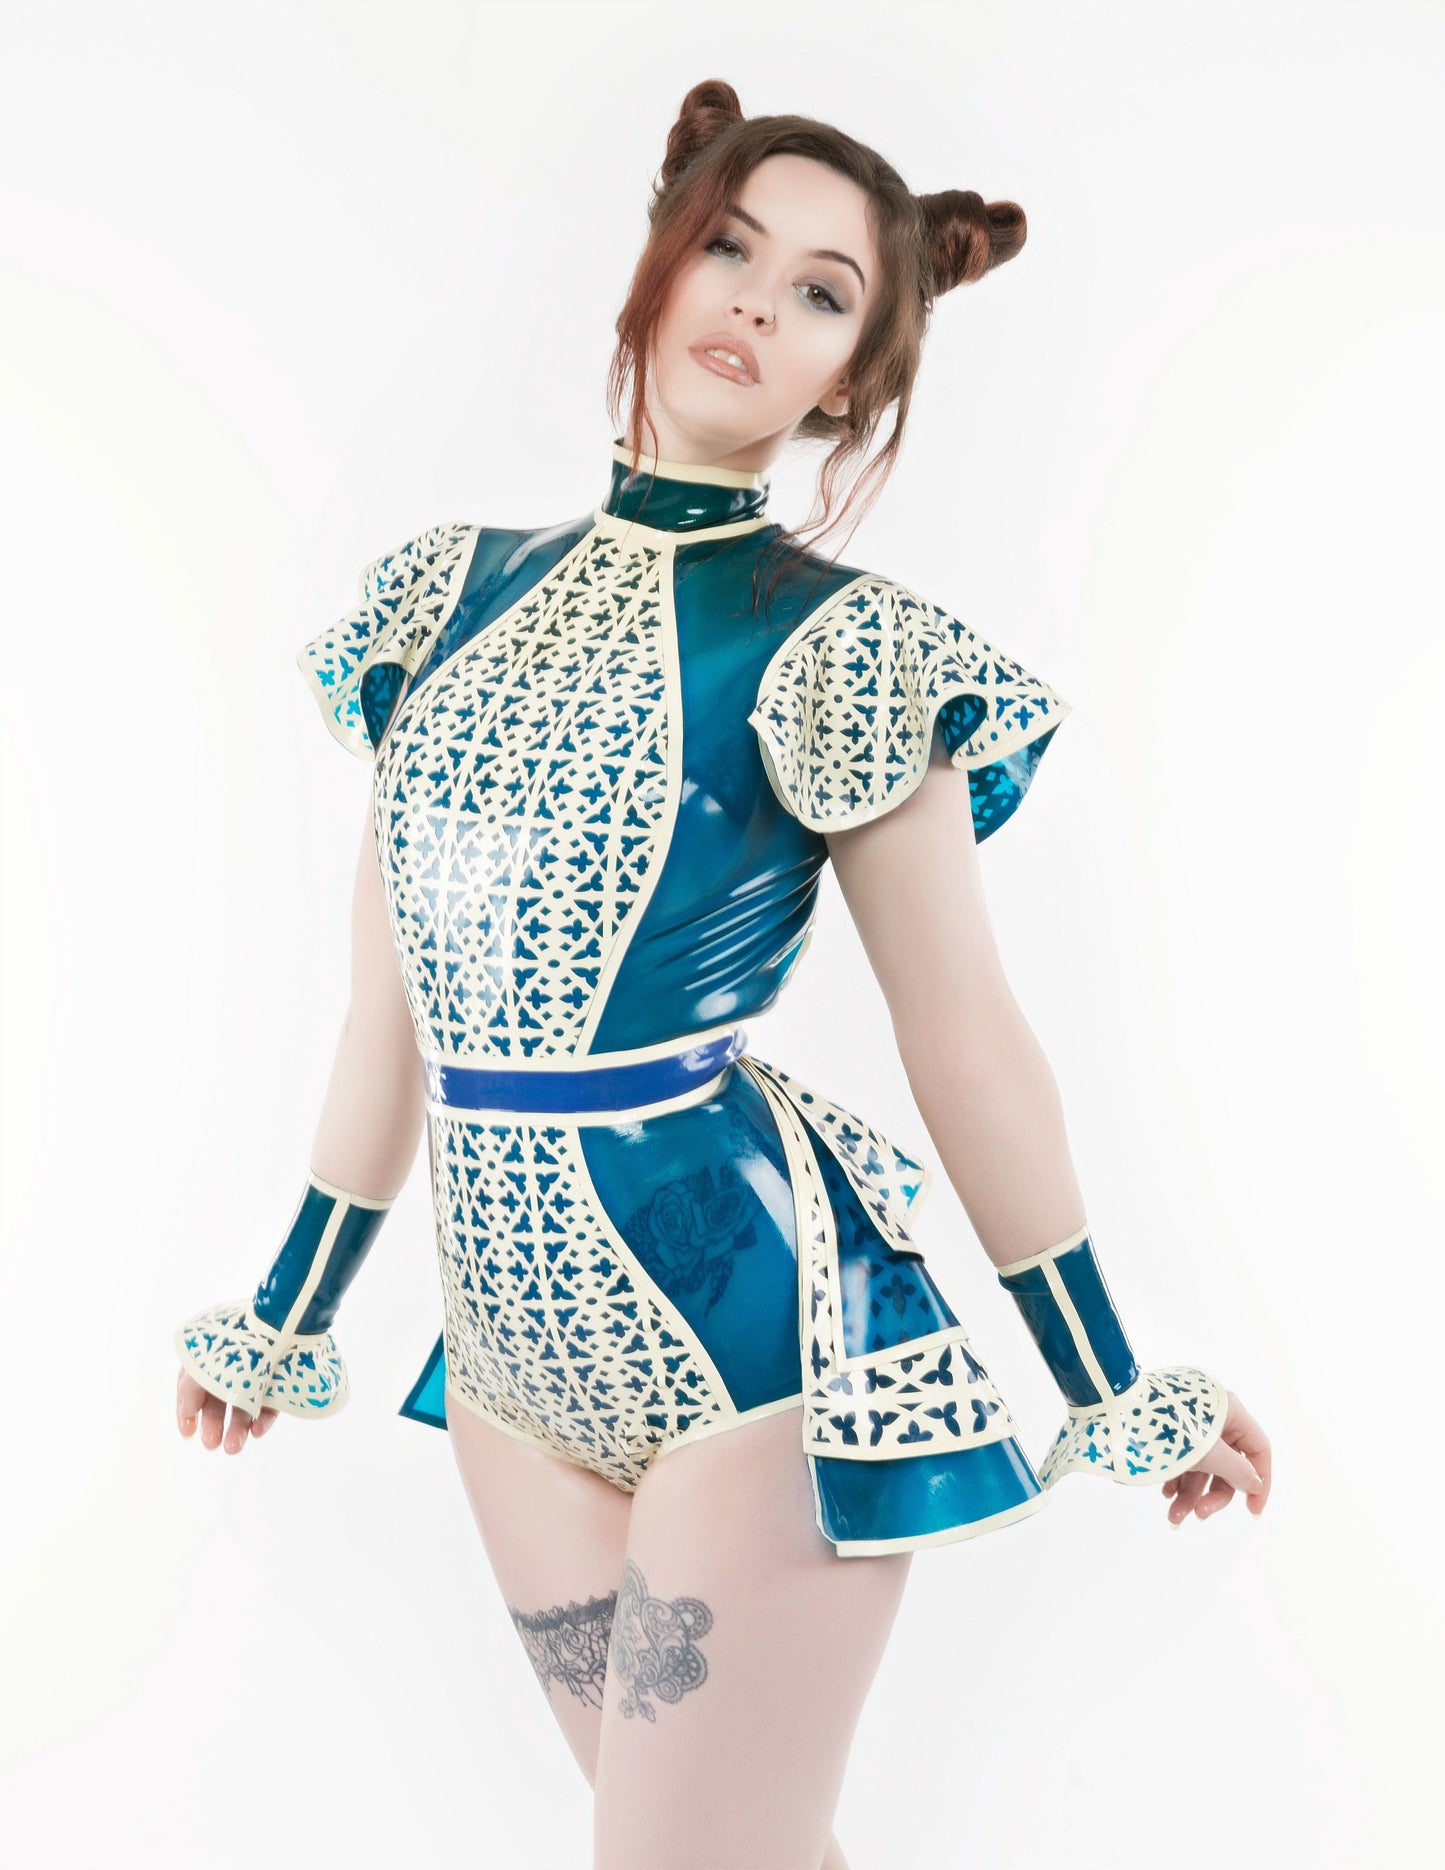 The Launch Latex Bustle Body